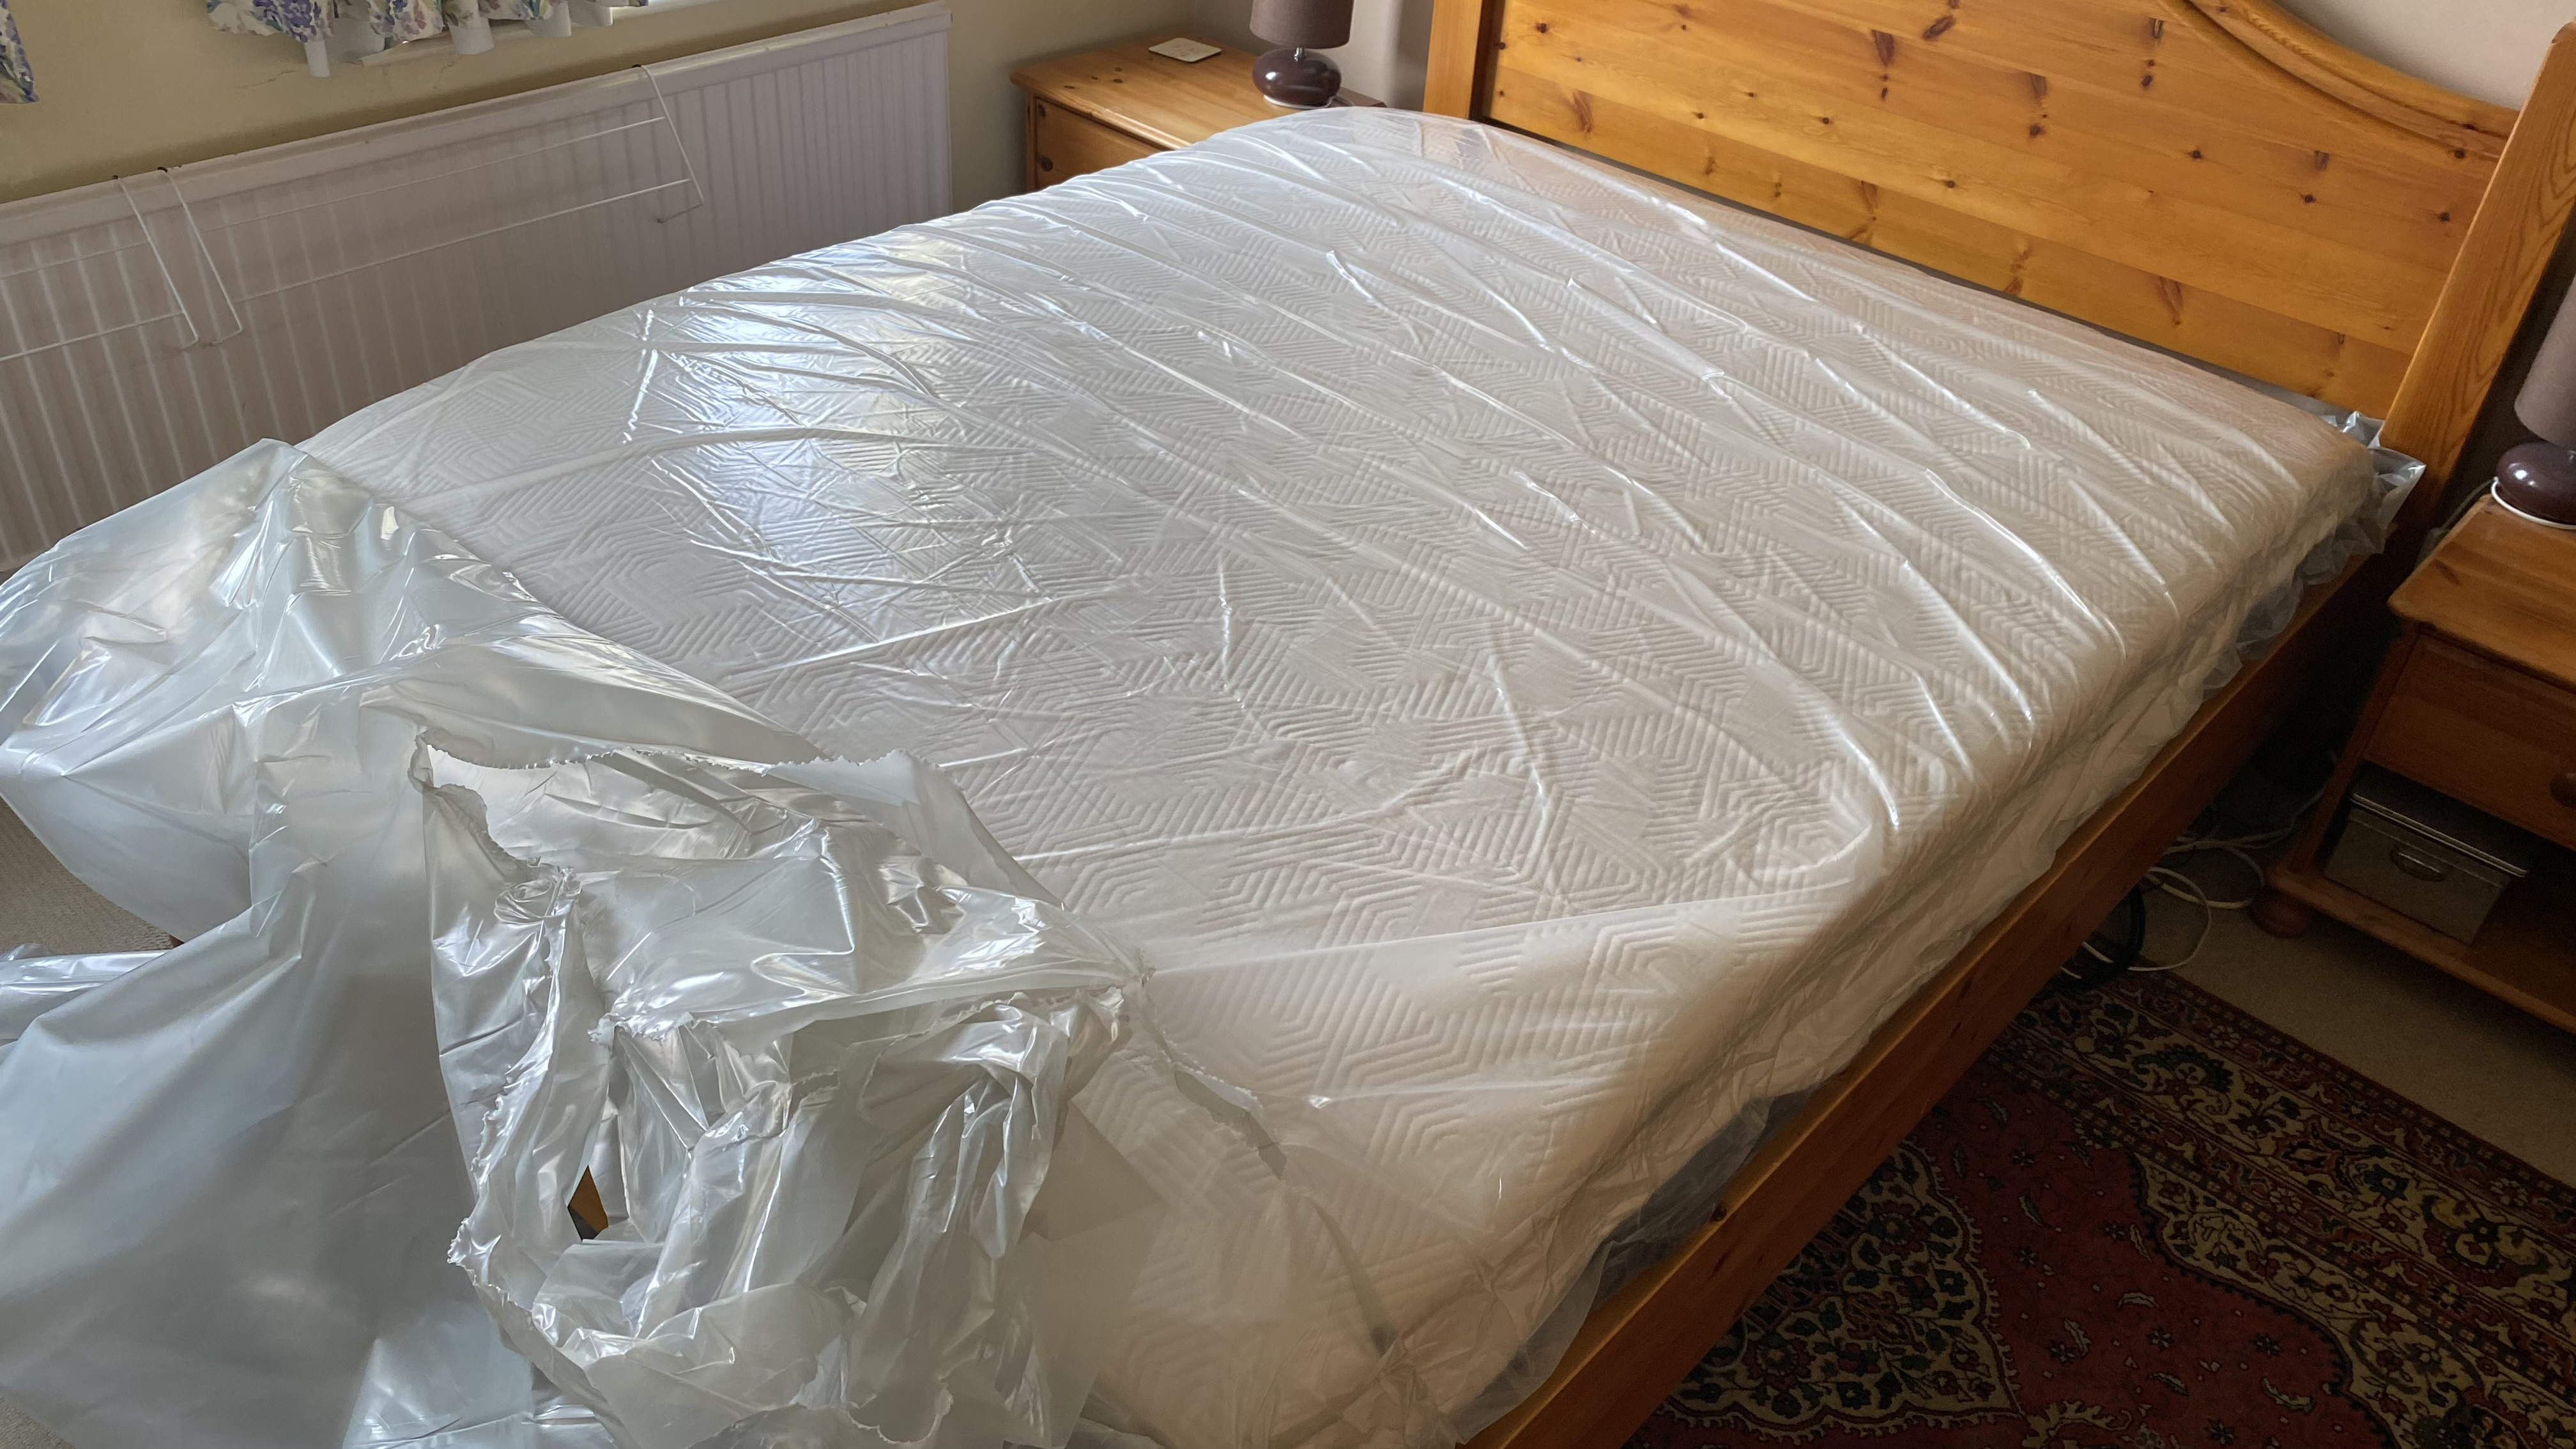 Brook + Wilde Suprema Mattress being unpacked from the materials it was shipped in